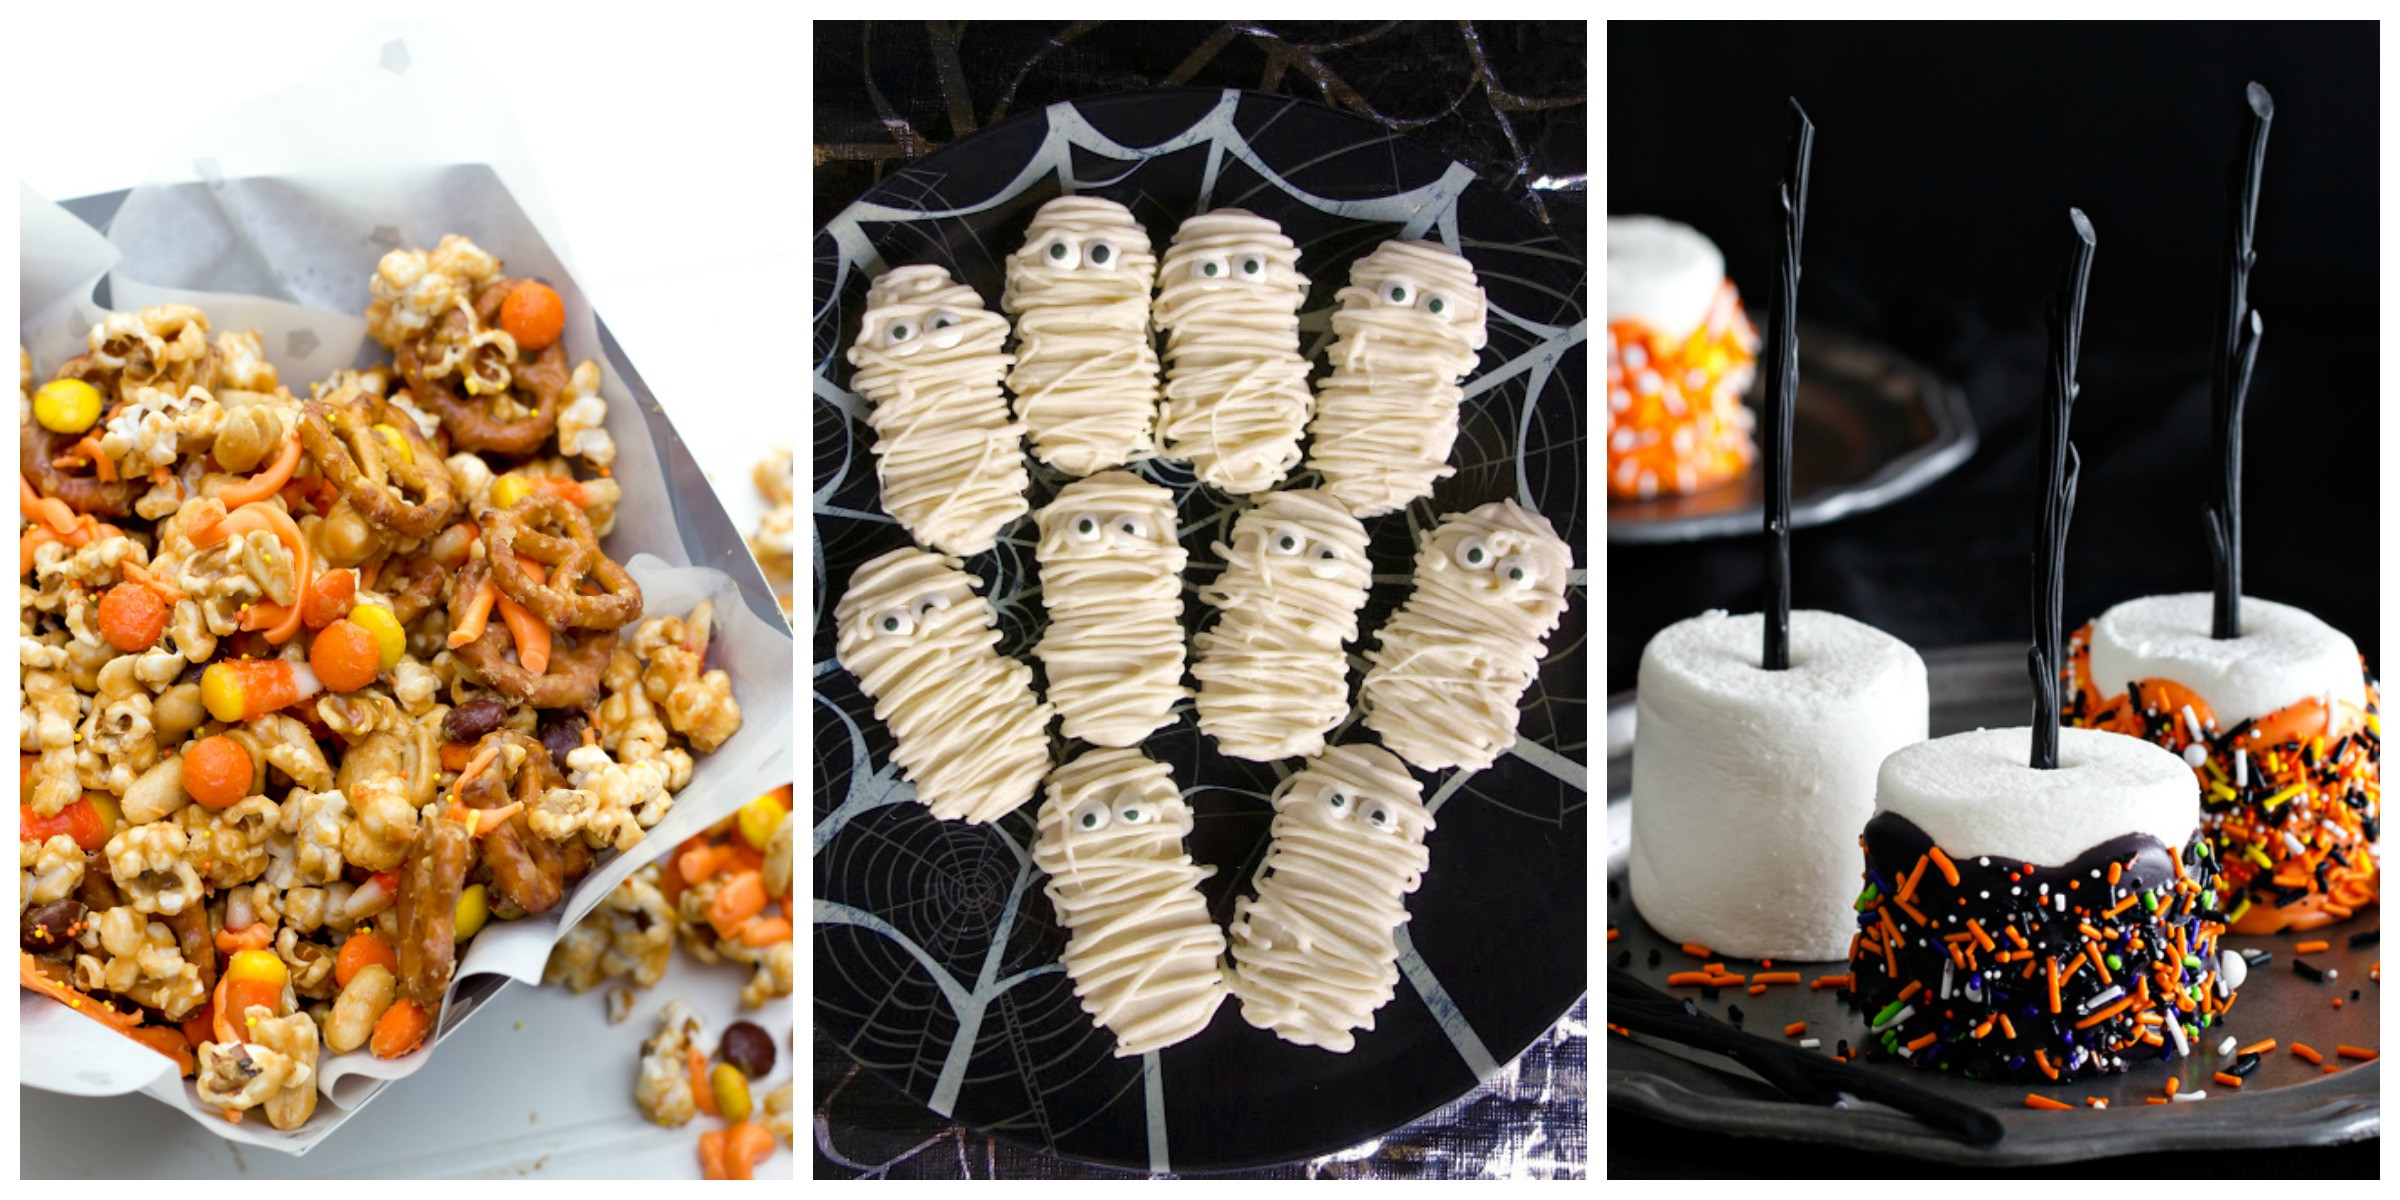 Easy Halloween Party Ideas
 22 Easy Halloween Party Food Ideas Cute Recipes for